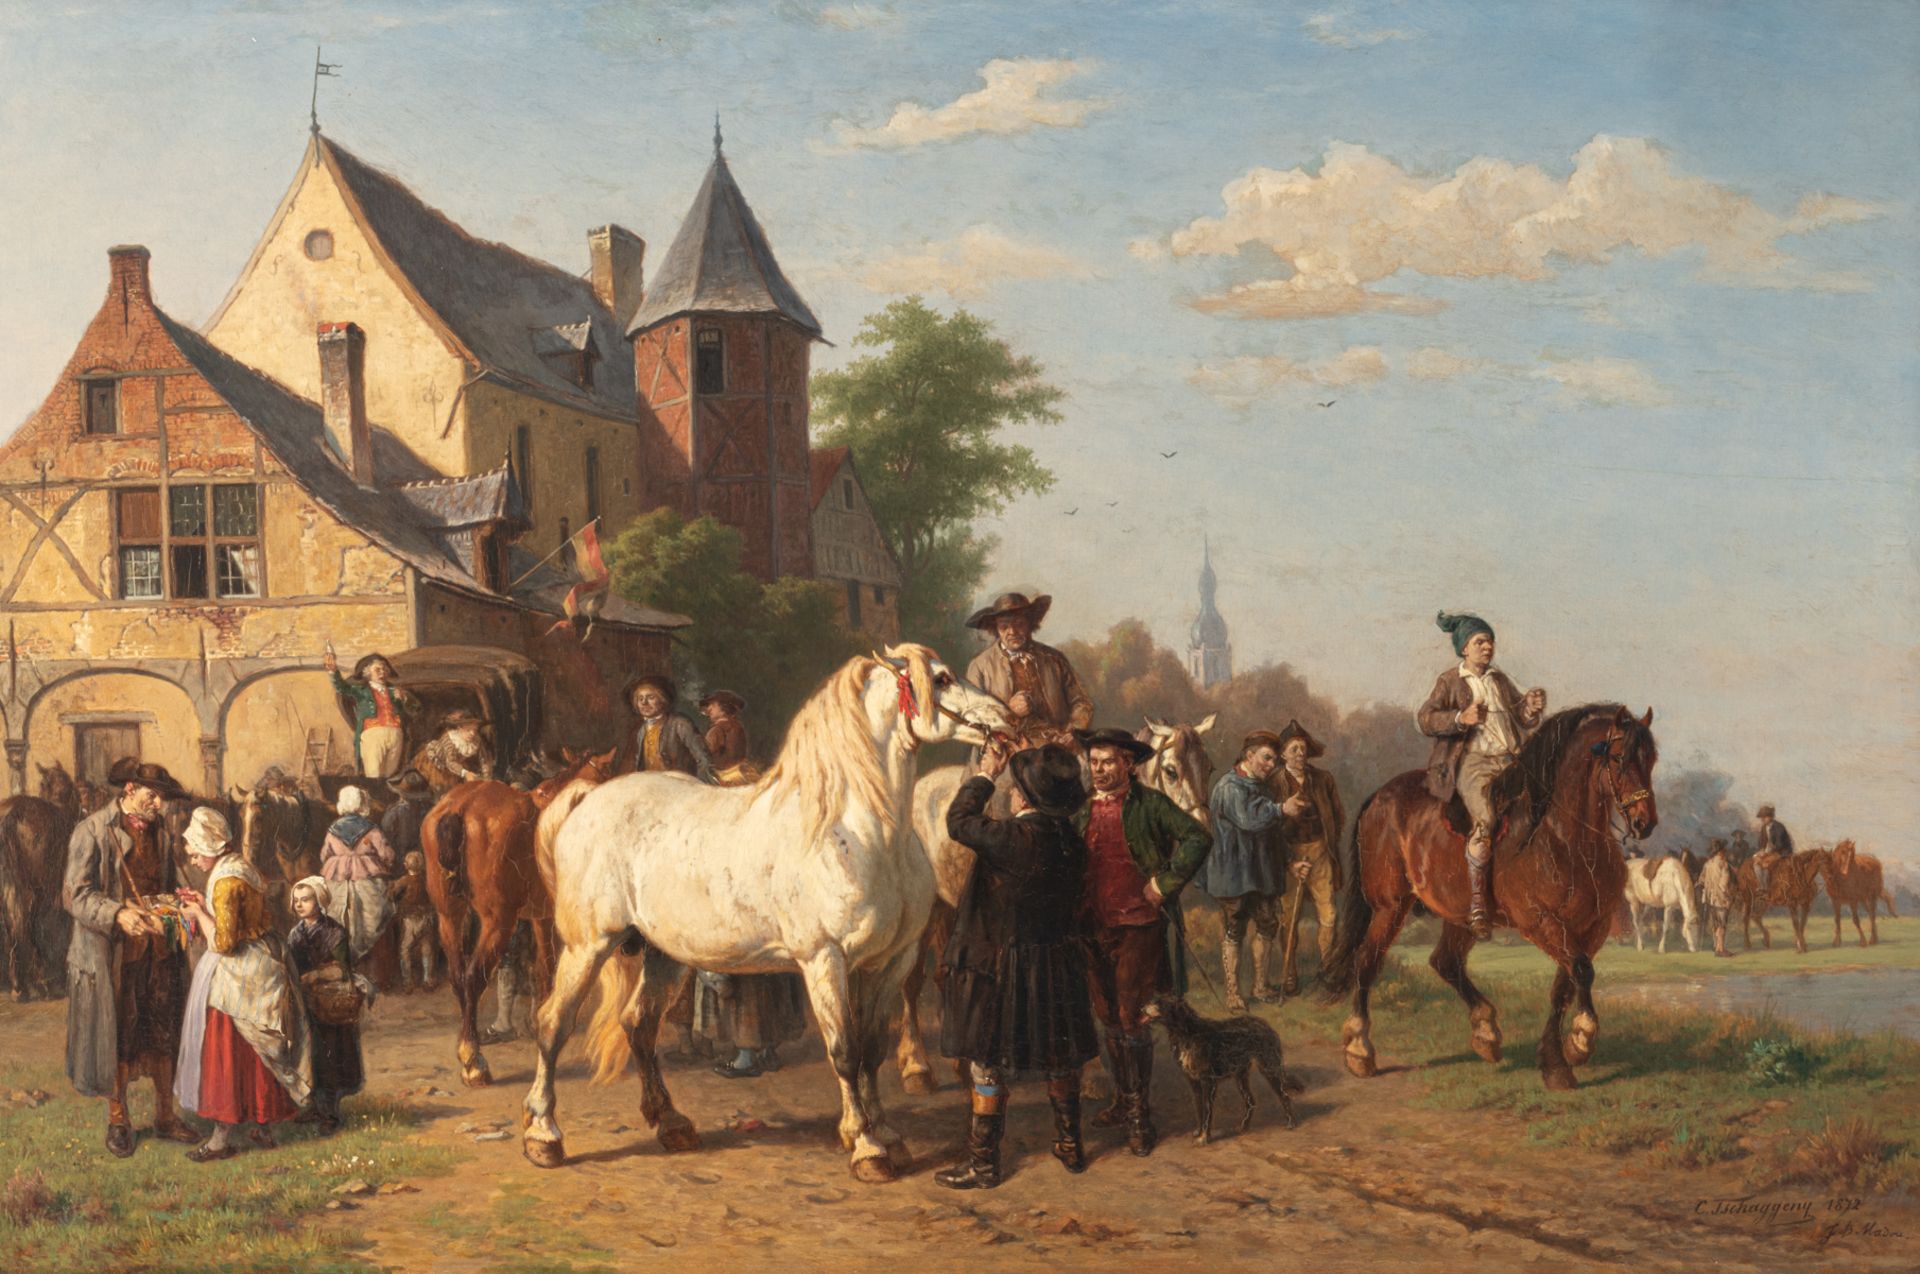 Tschaggeny C. / Madou J.B. dated 1872, horse dealers inspecting the horses at an annual market in a